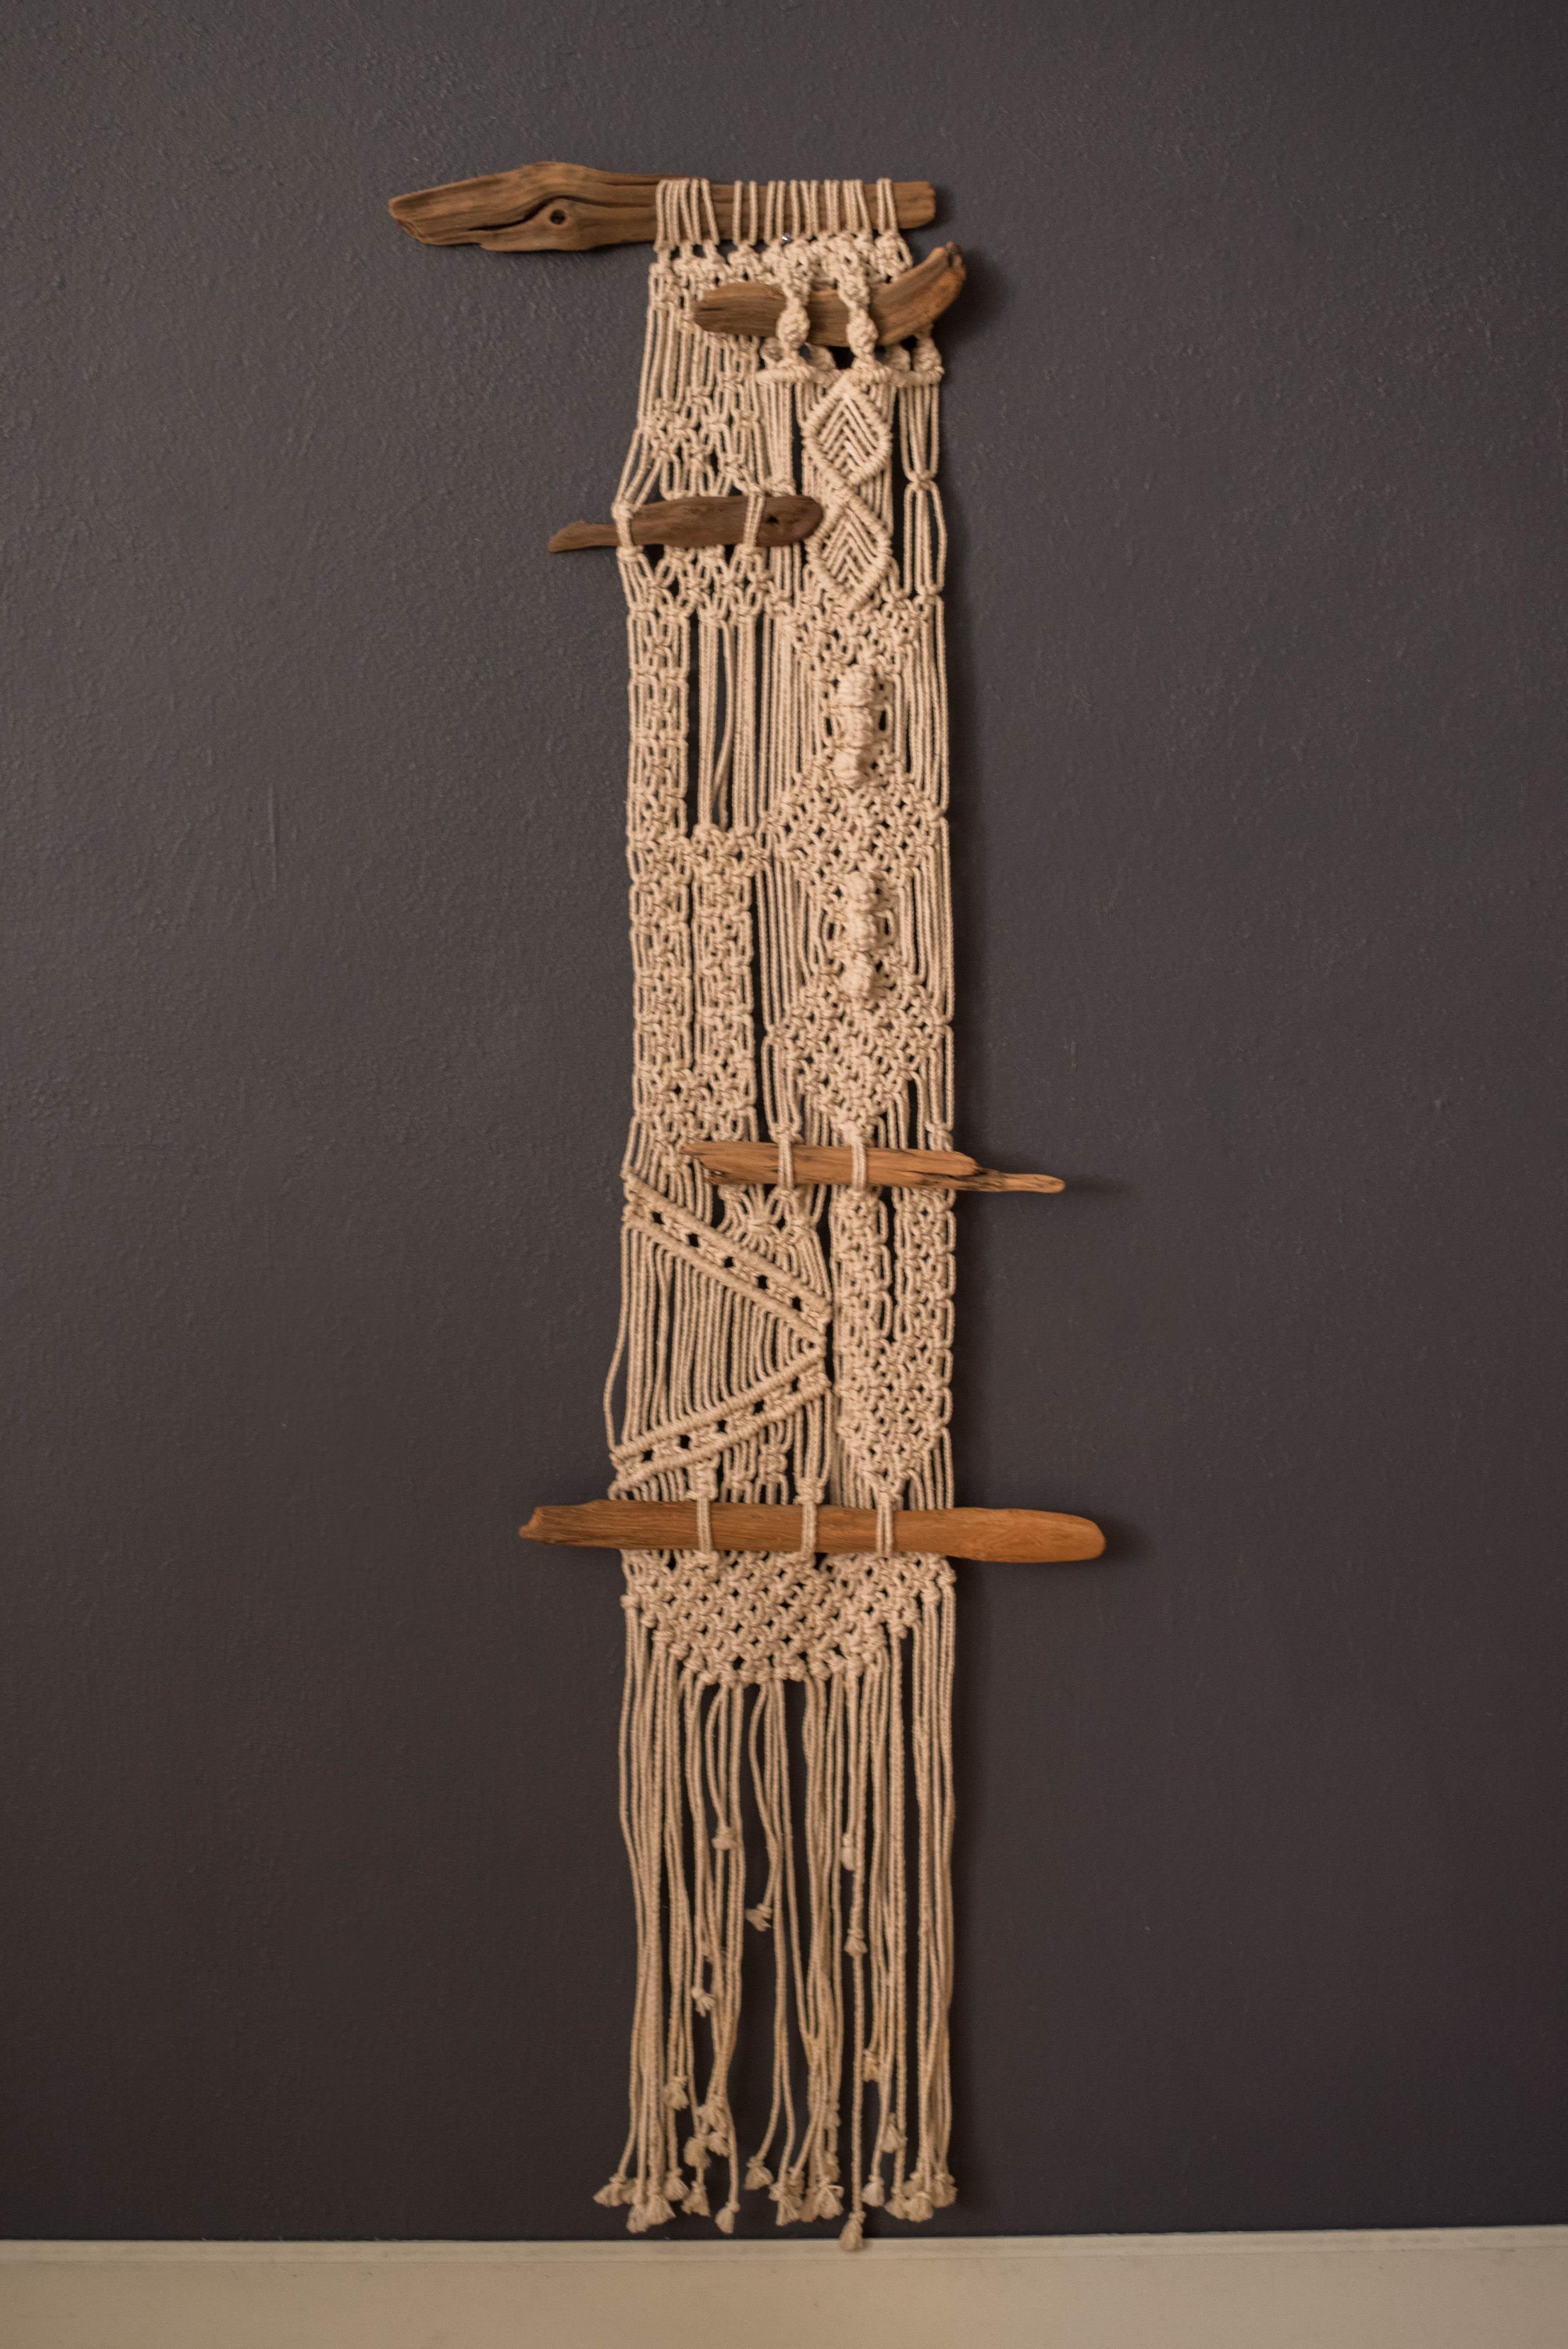 Vintage original macrame fiber art backdrop tapestry, circa 1970s. Features an intricate pattern of hand knotted designs accented with abstract pieces of driftwood. This vertical hanging wall piece adds natural texture and Dimension to any Bohemian